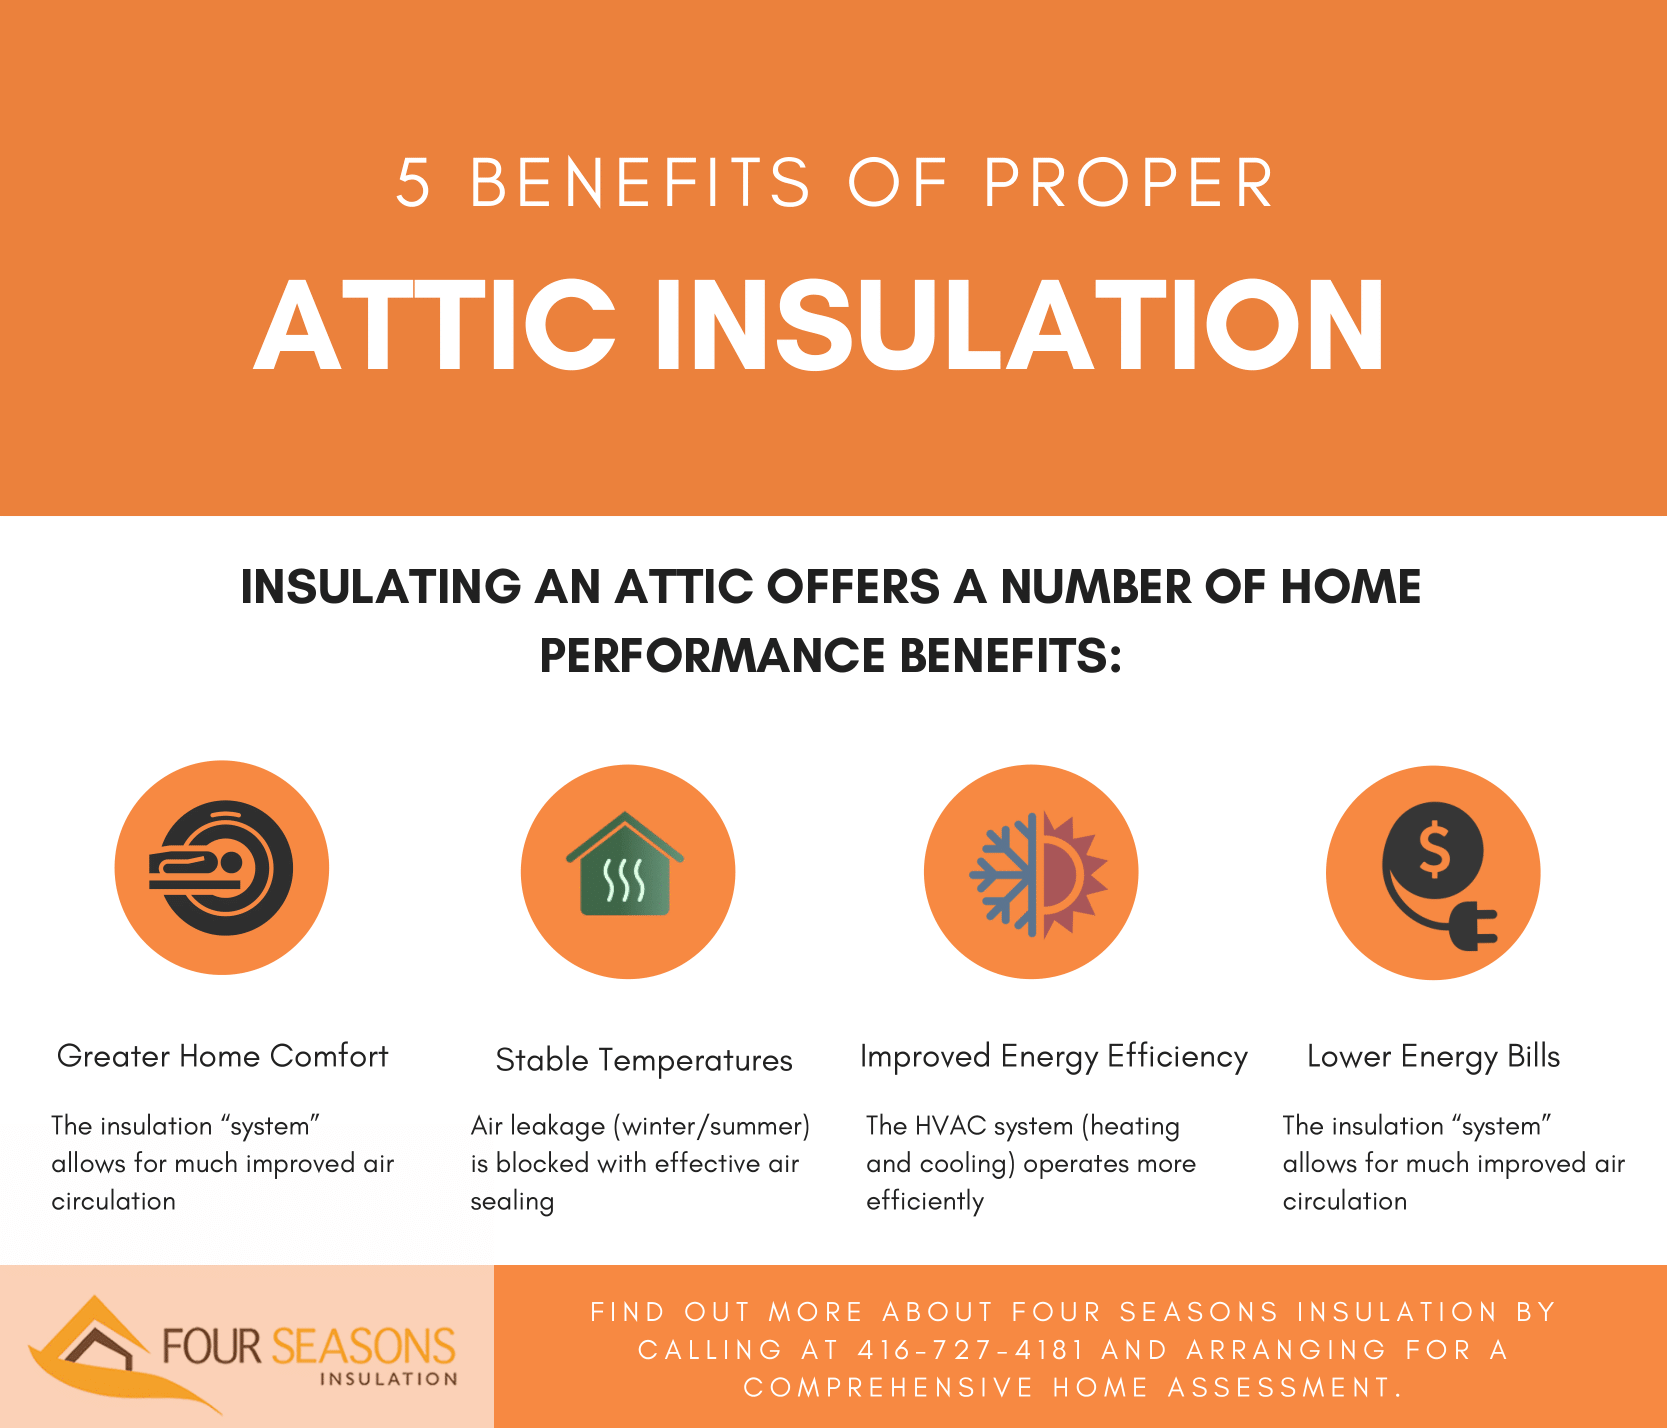 Benefits of home attic insulation in Mississauga - Infographic